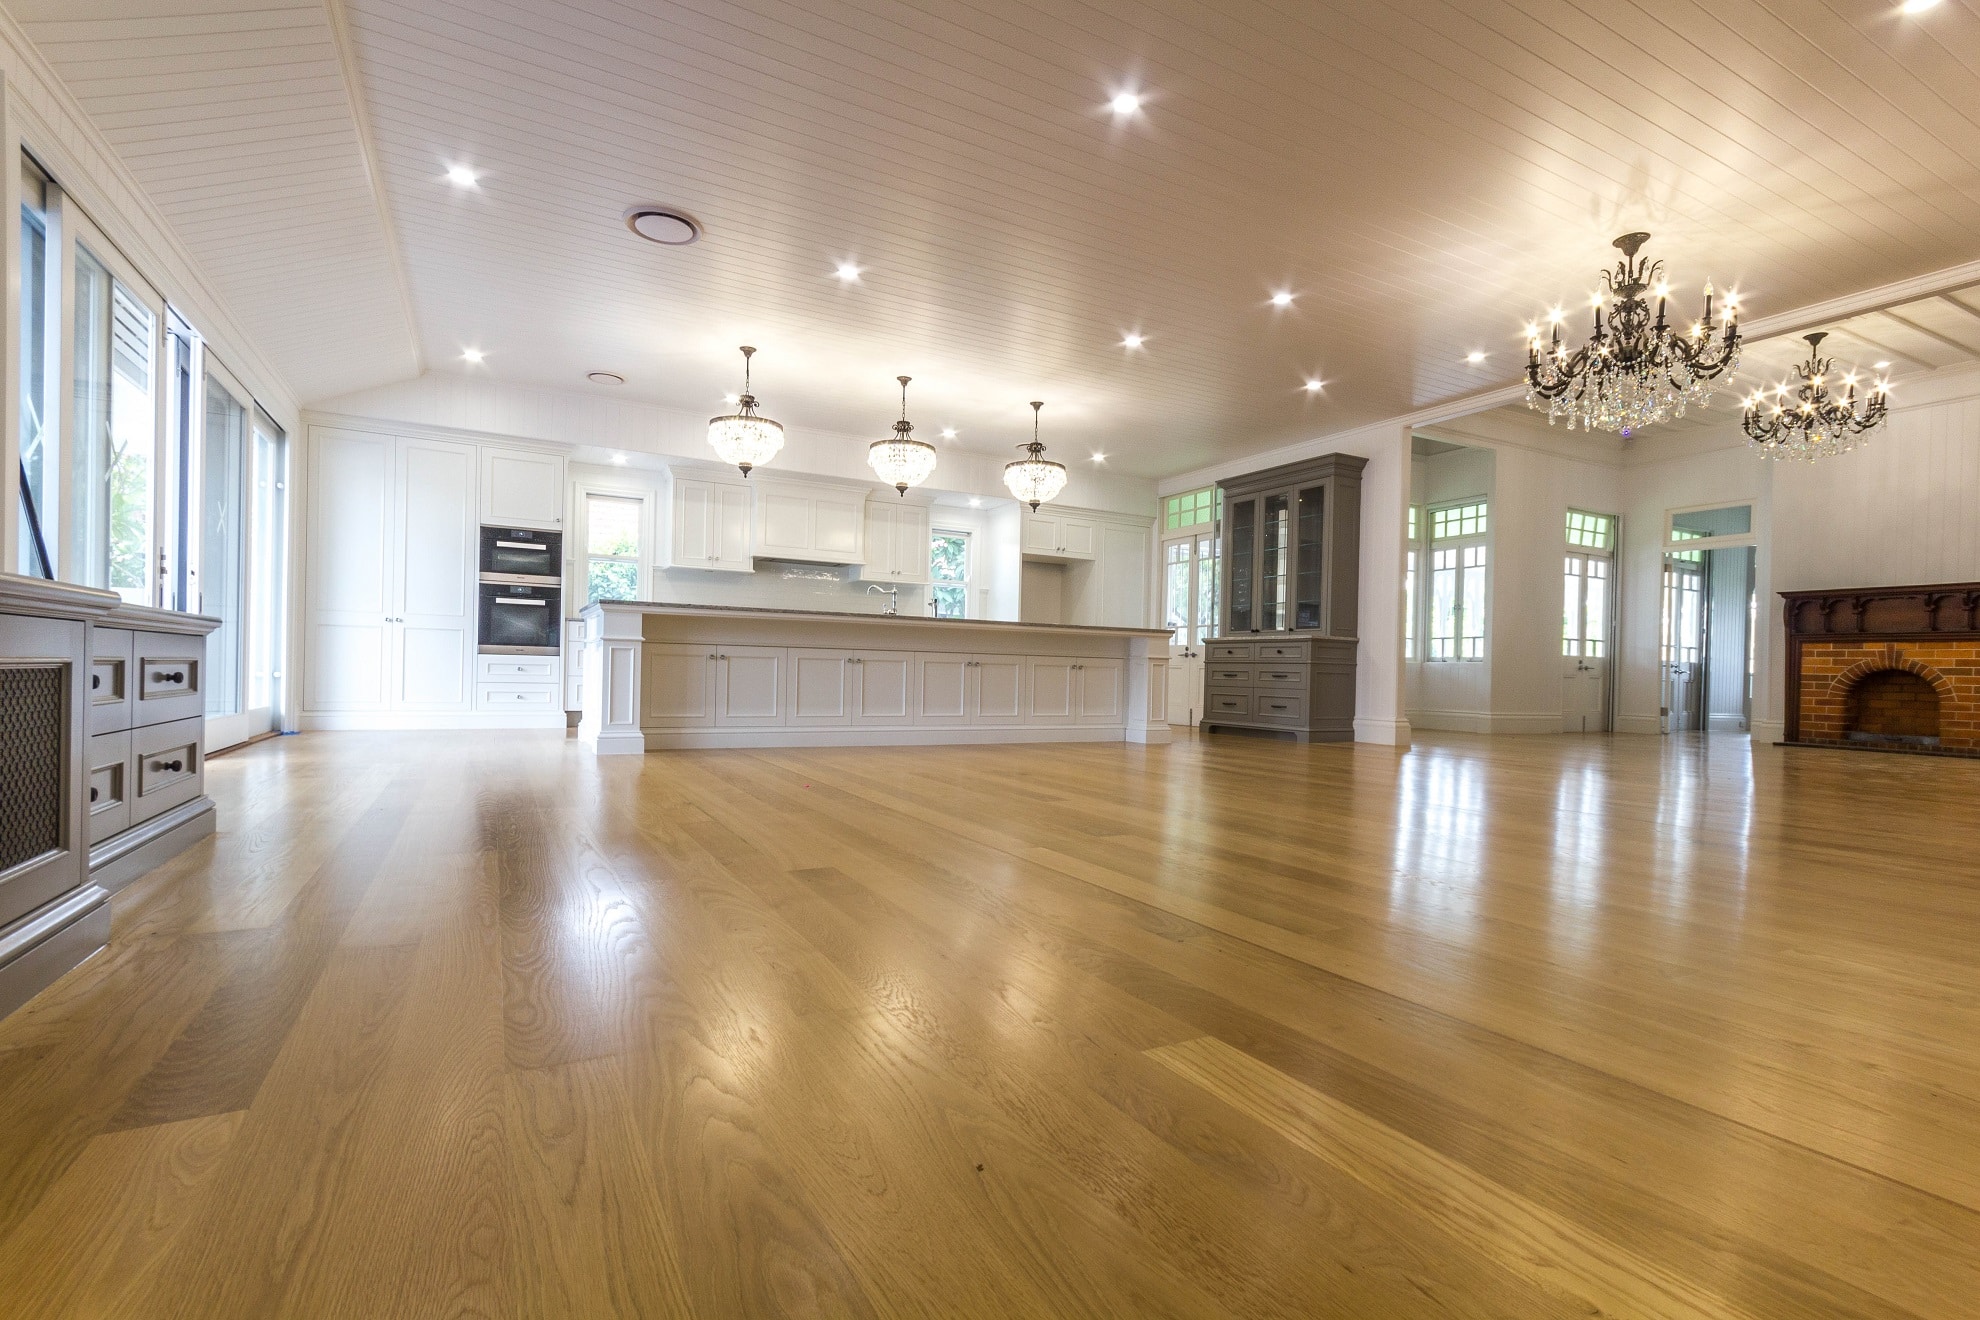 Quality Floors by Max Francis